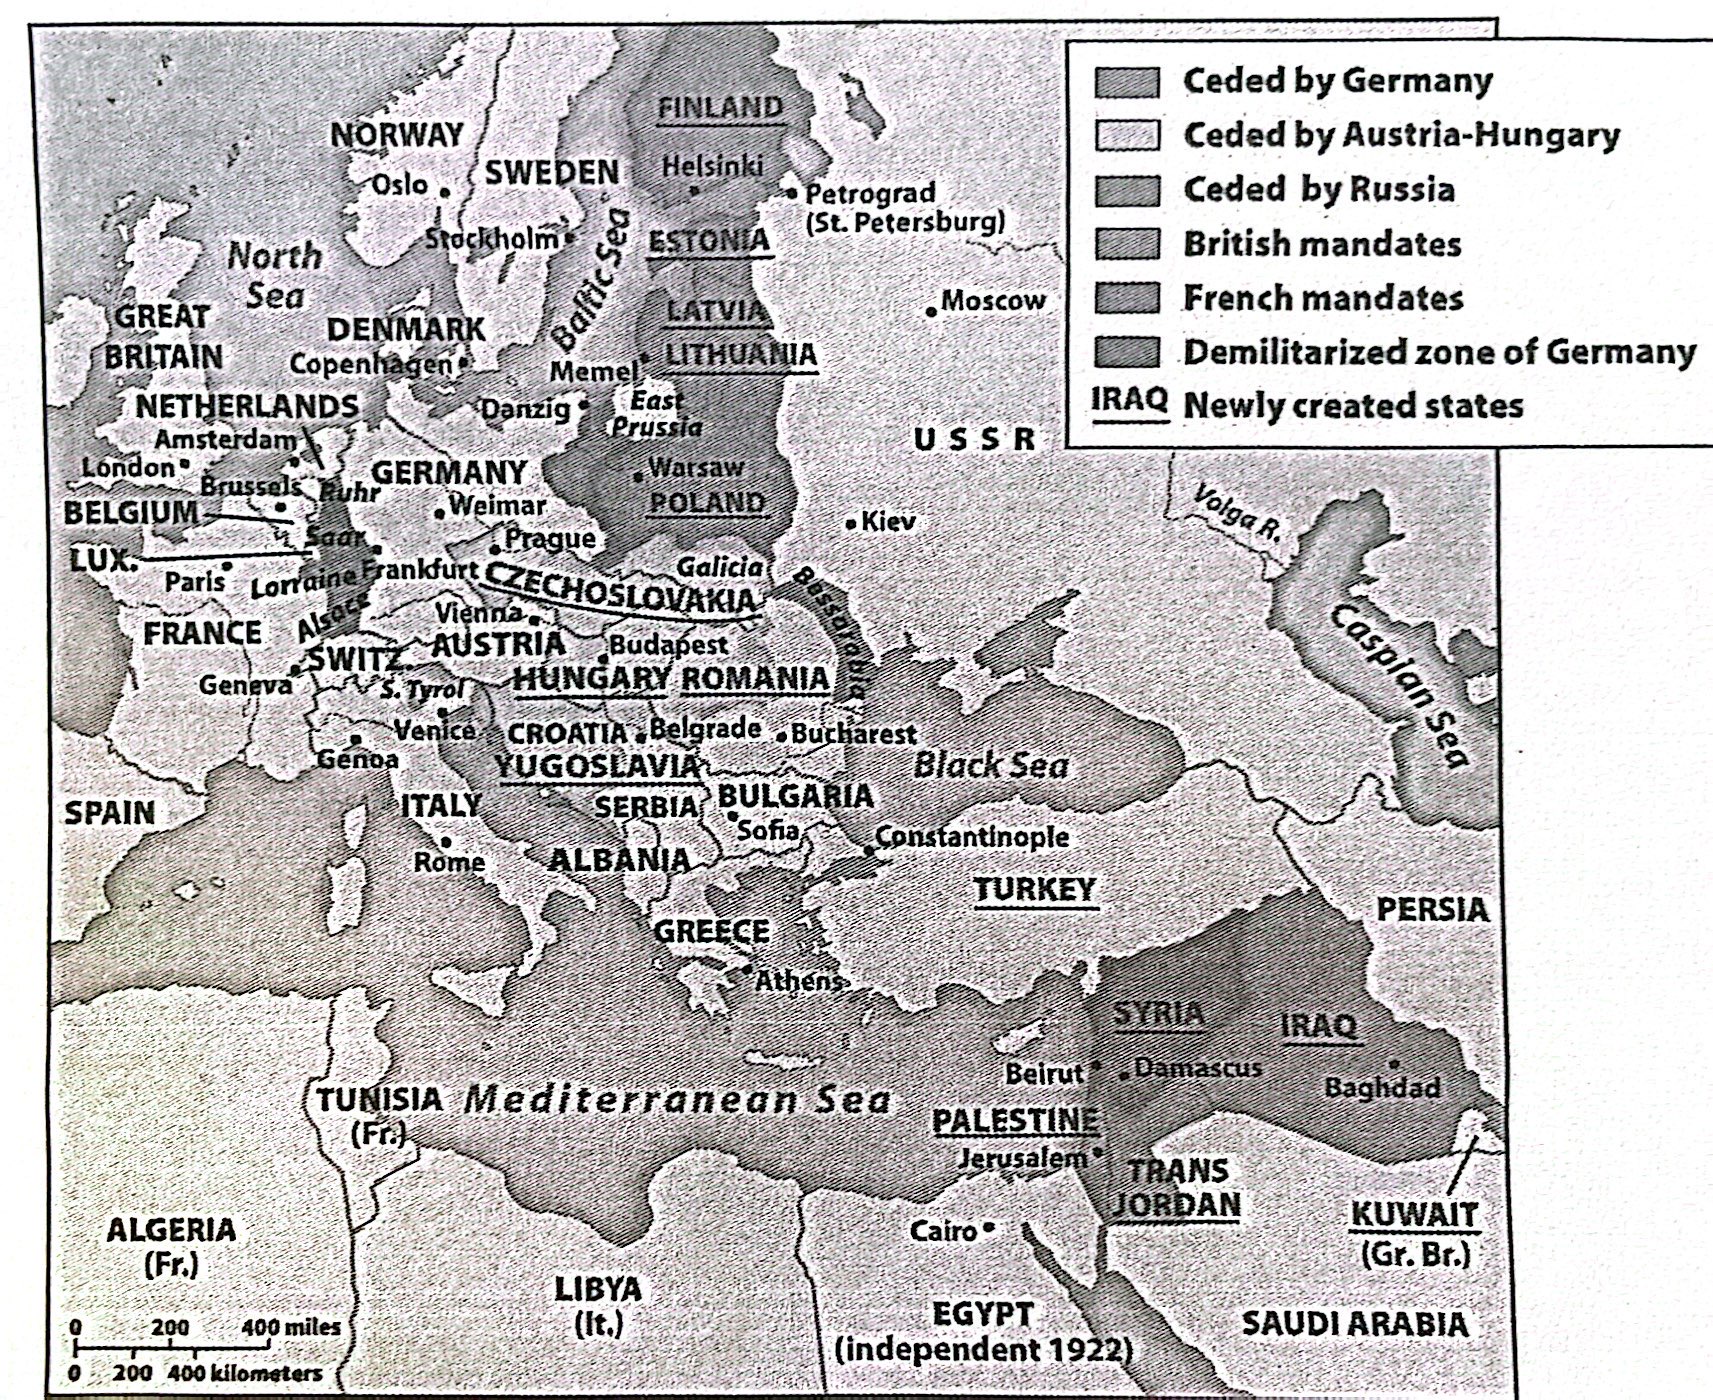 <p><strong>11-8. </strong>The map above shows Europe and the Middle East during the period</p><p>a) Between the Renaissance and Reformation<br>b) Between the two world wars<br>c) Of the New Imperialism<br>d) Of the Cold War</p>